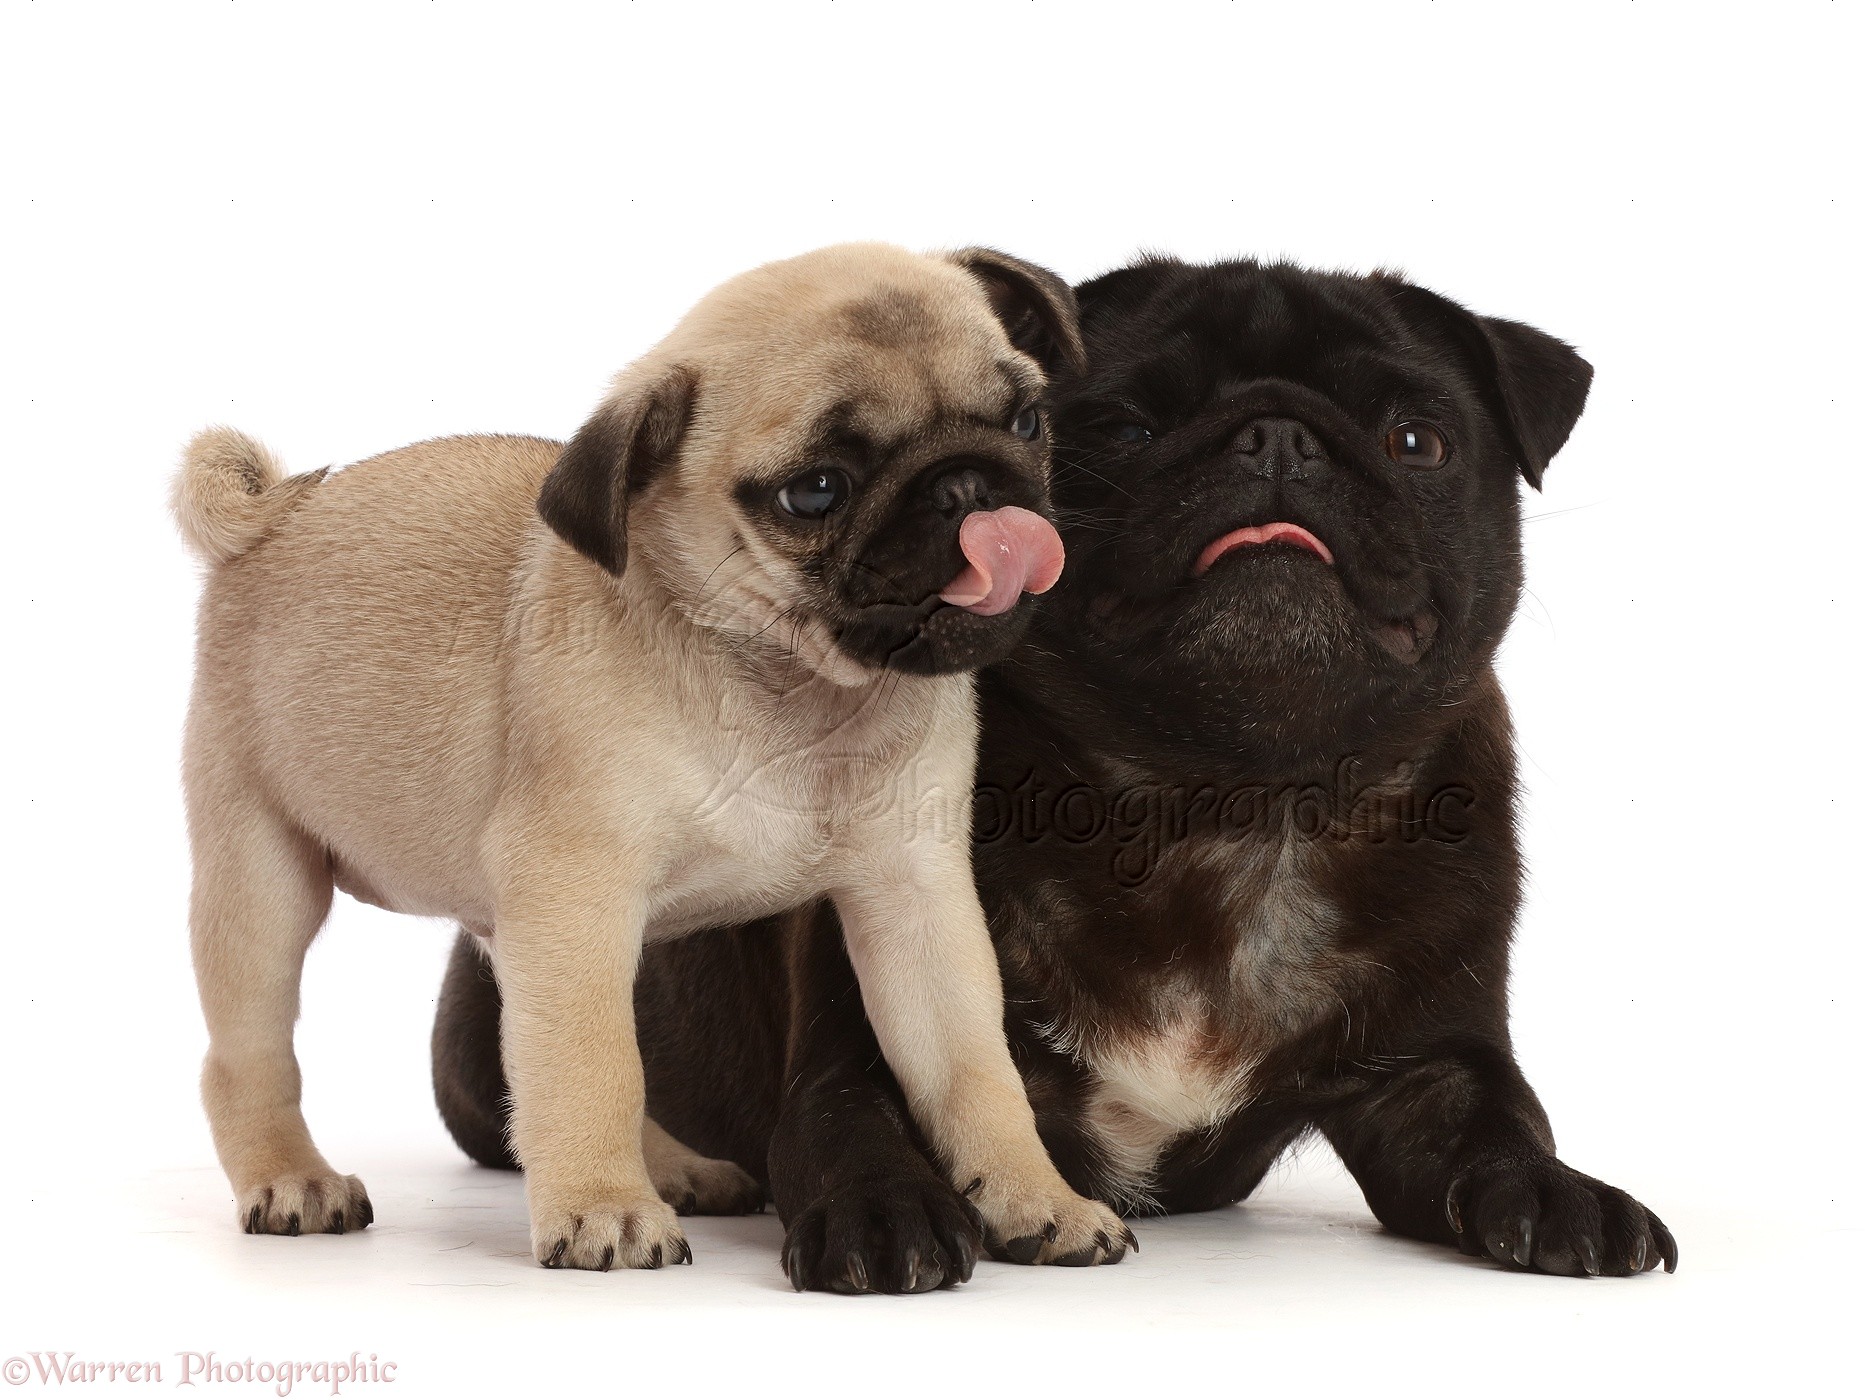 Dogs: Black Pug and Fawn puppy with tongues out photo WP48063